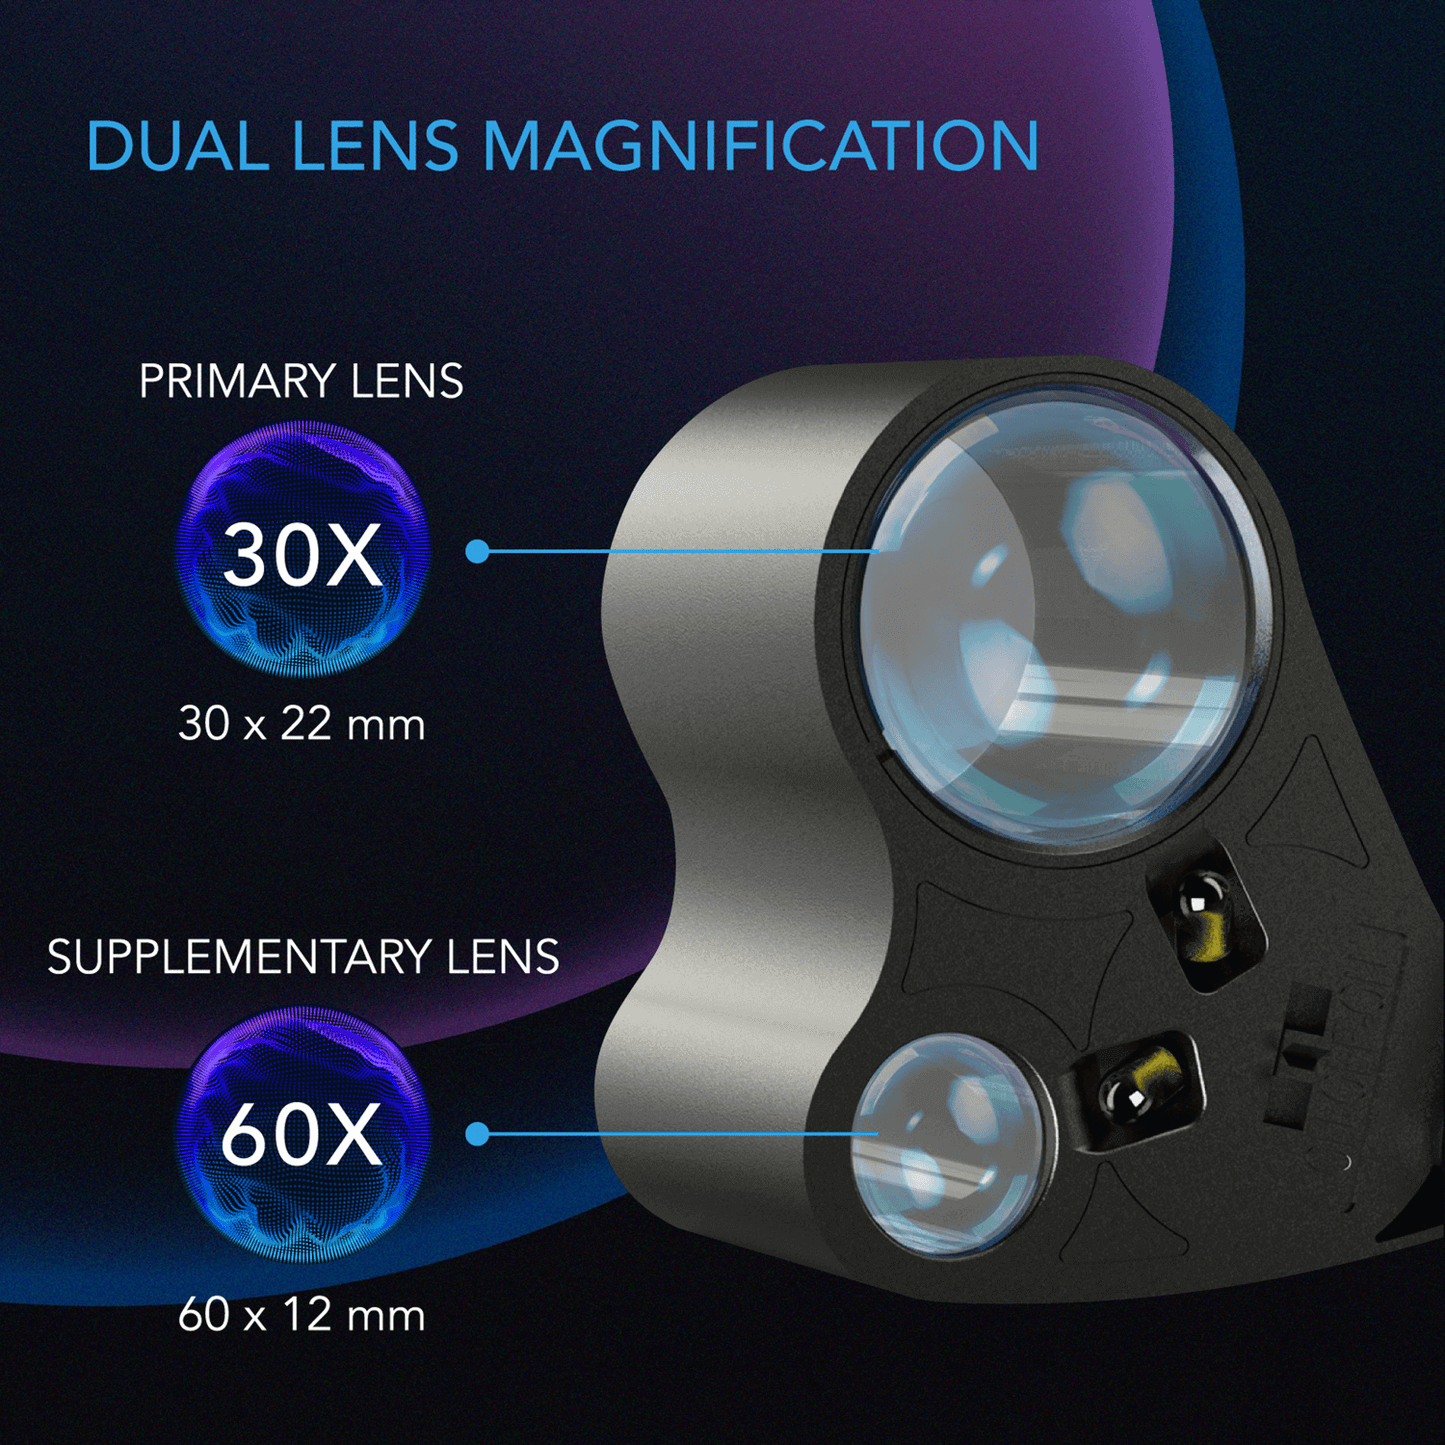 AC Infinity Jewelers Loupe, Pocket Magnifying Glass with LED Light & Dual Lenses | AC-JWA3 | Grow Tents Depot | Harvest & Extraction | 819137022232